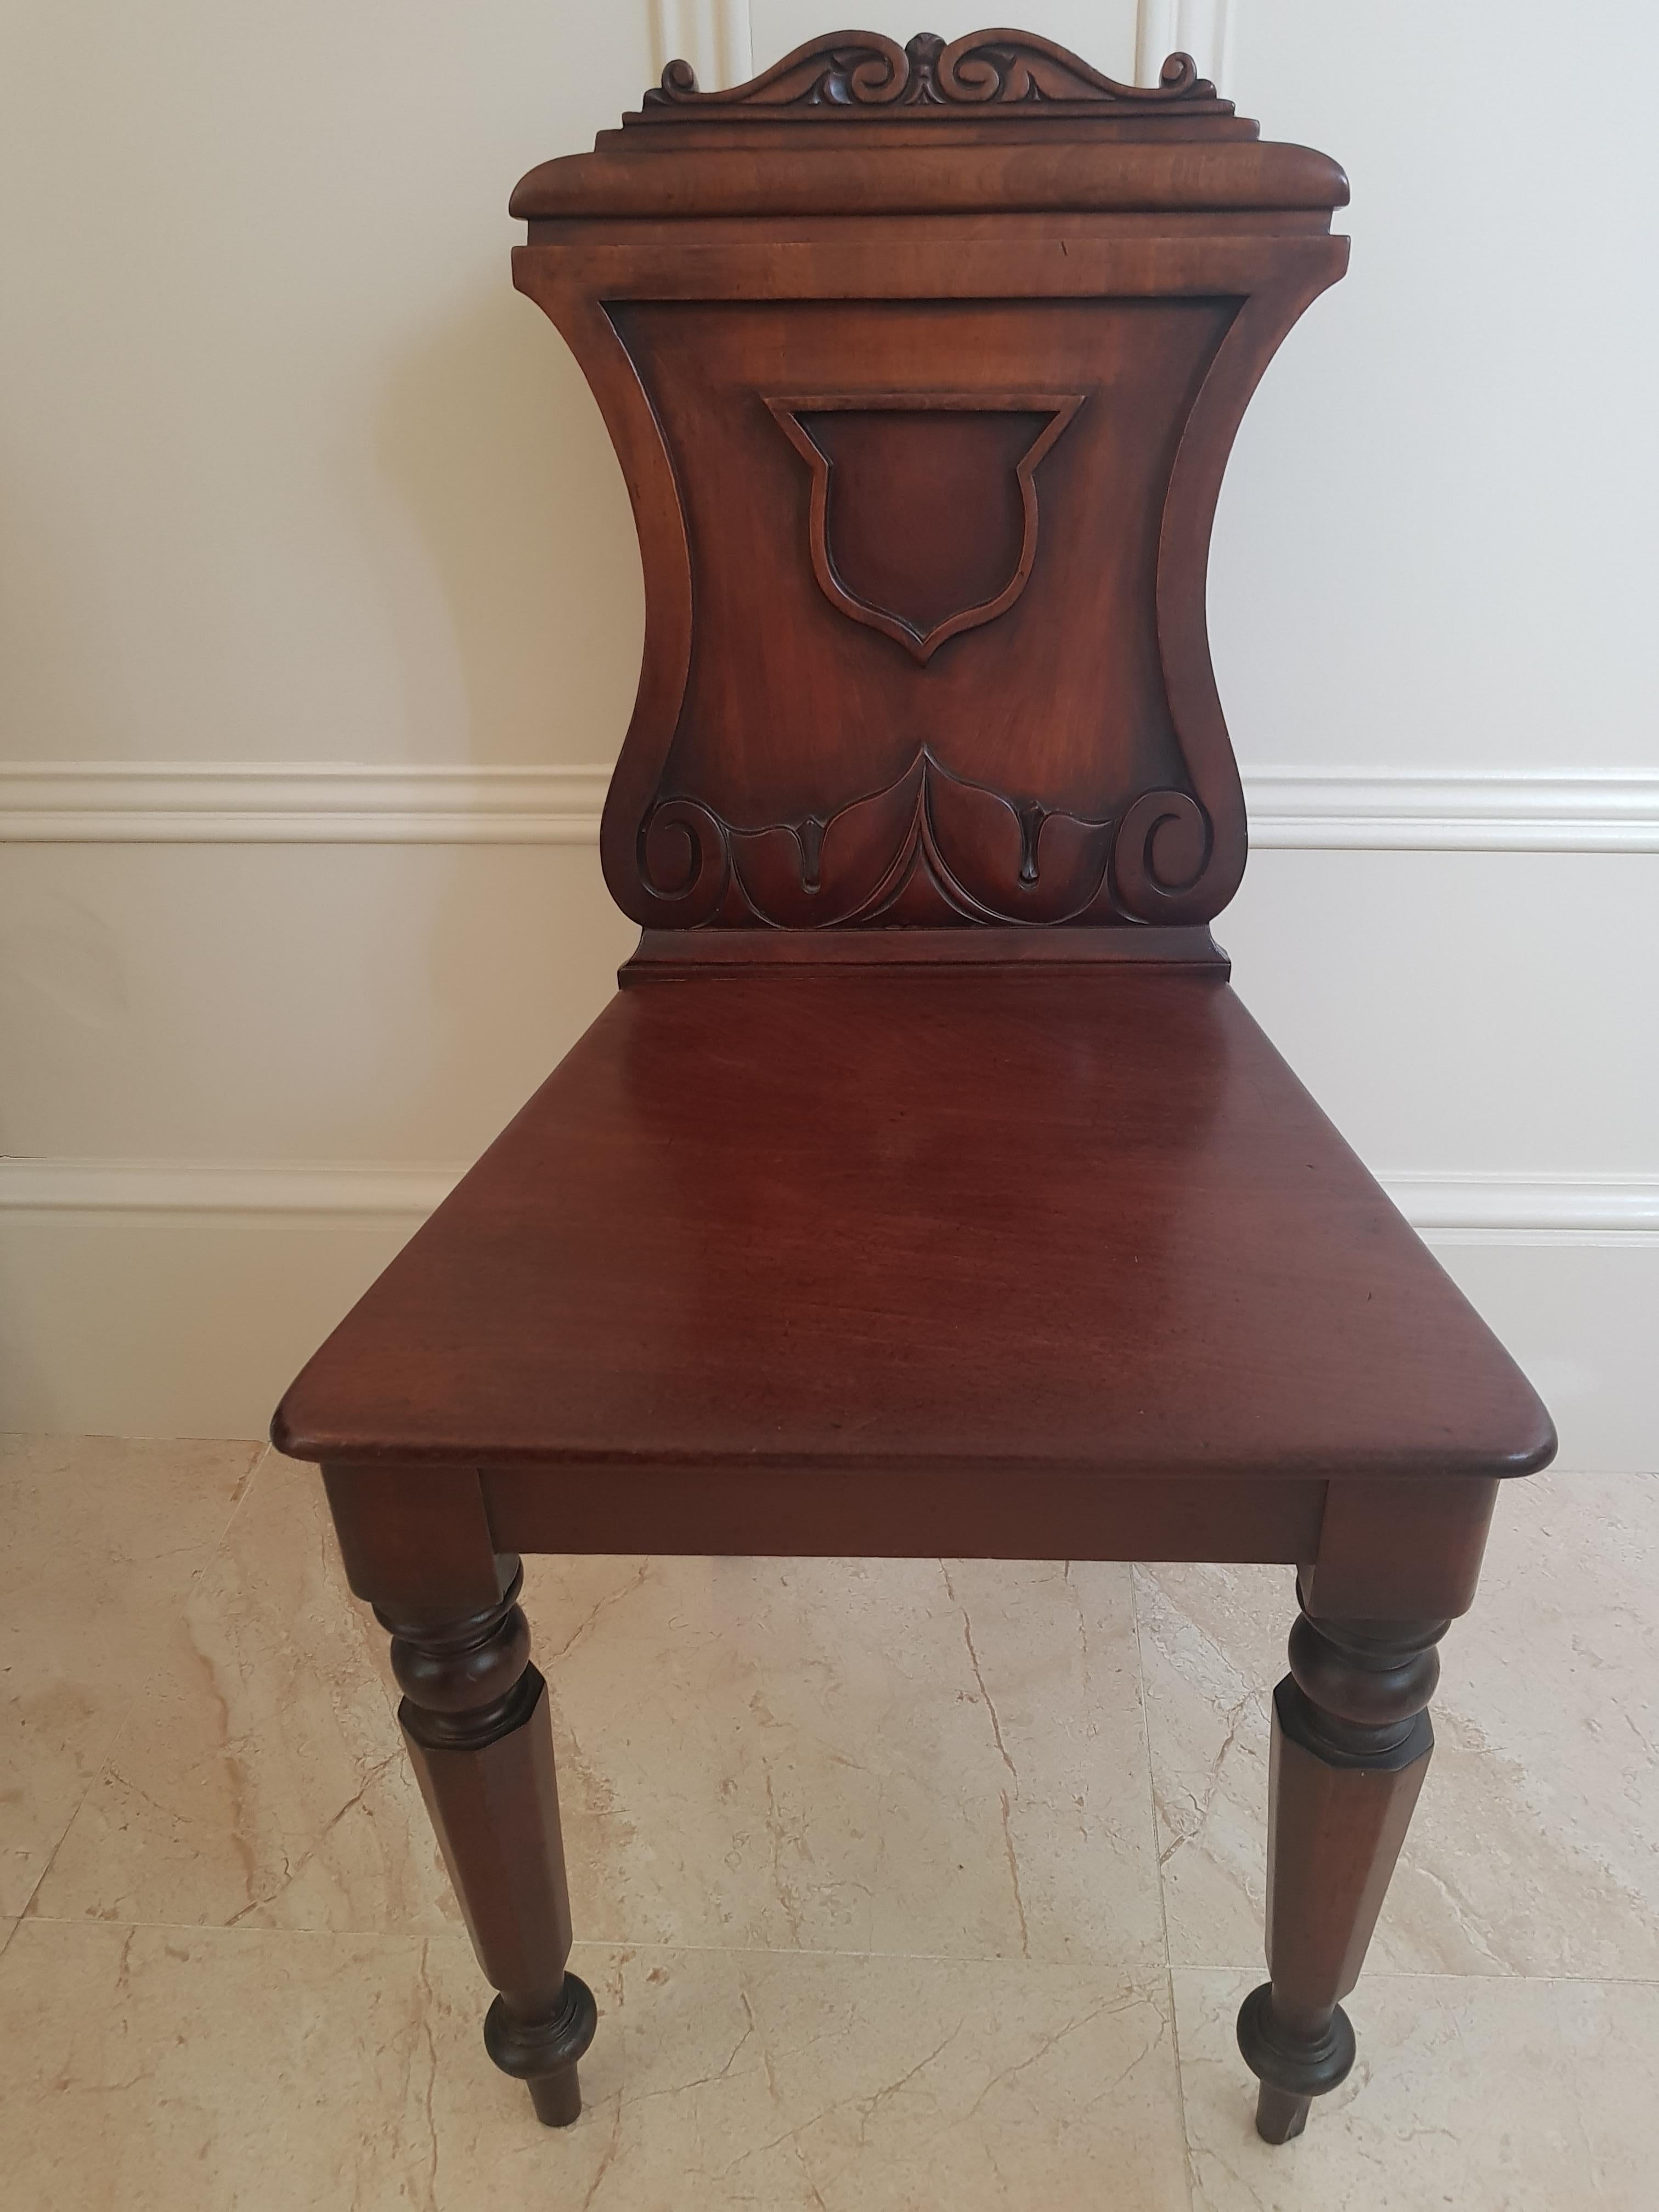 Regency Period Mahogany Hall Chair In Good Condition For Sale In Dromod, Co. Leitrim